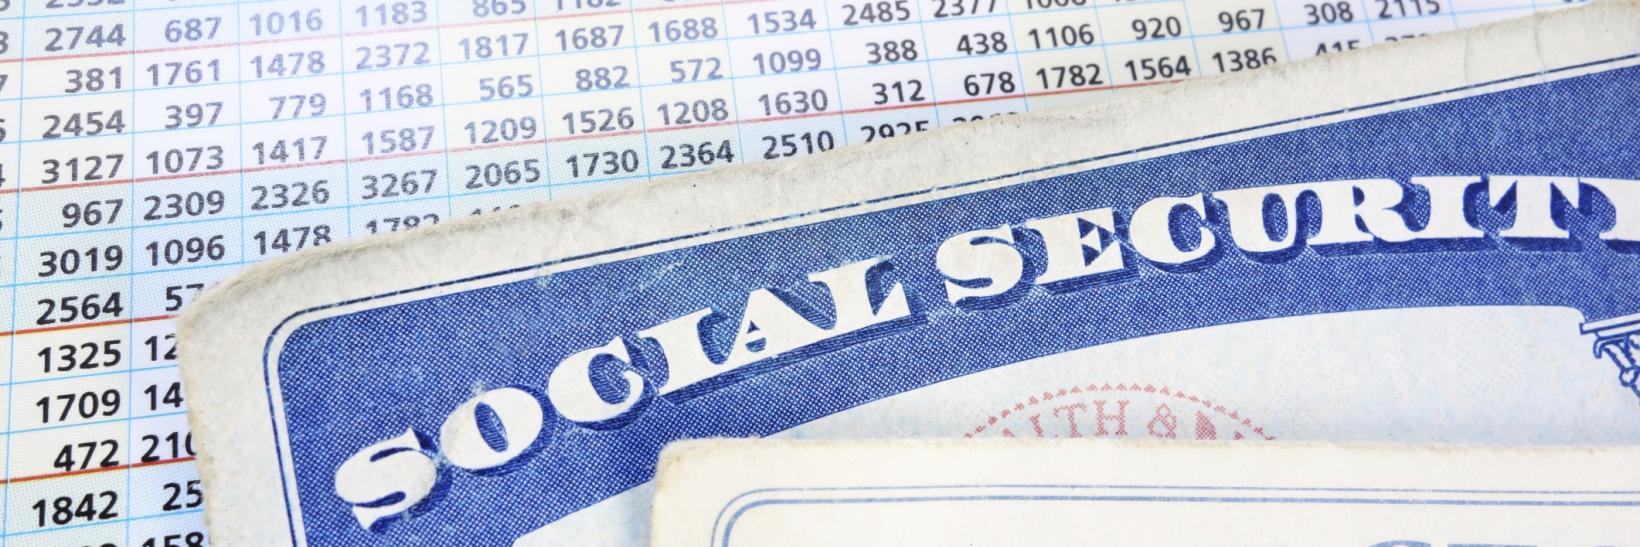 social security card and numbers